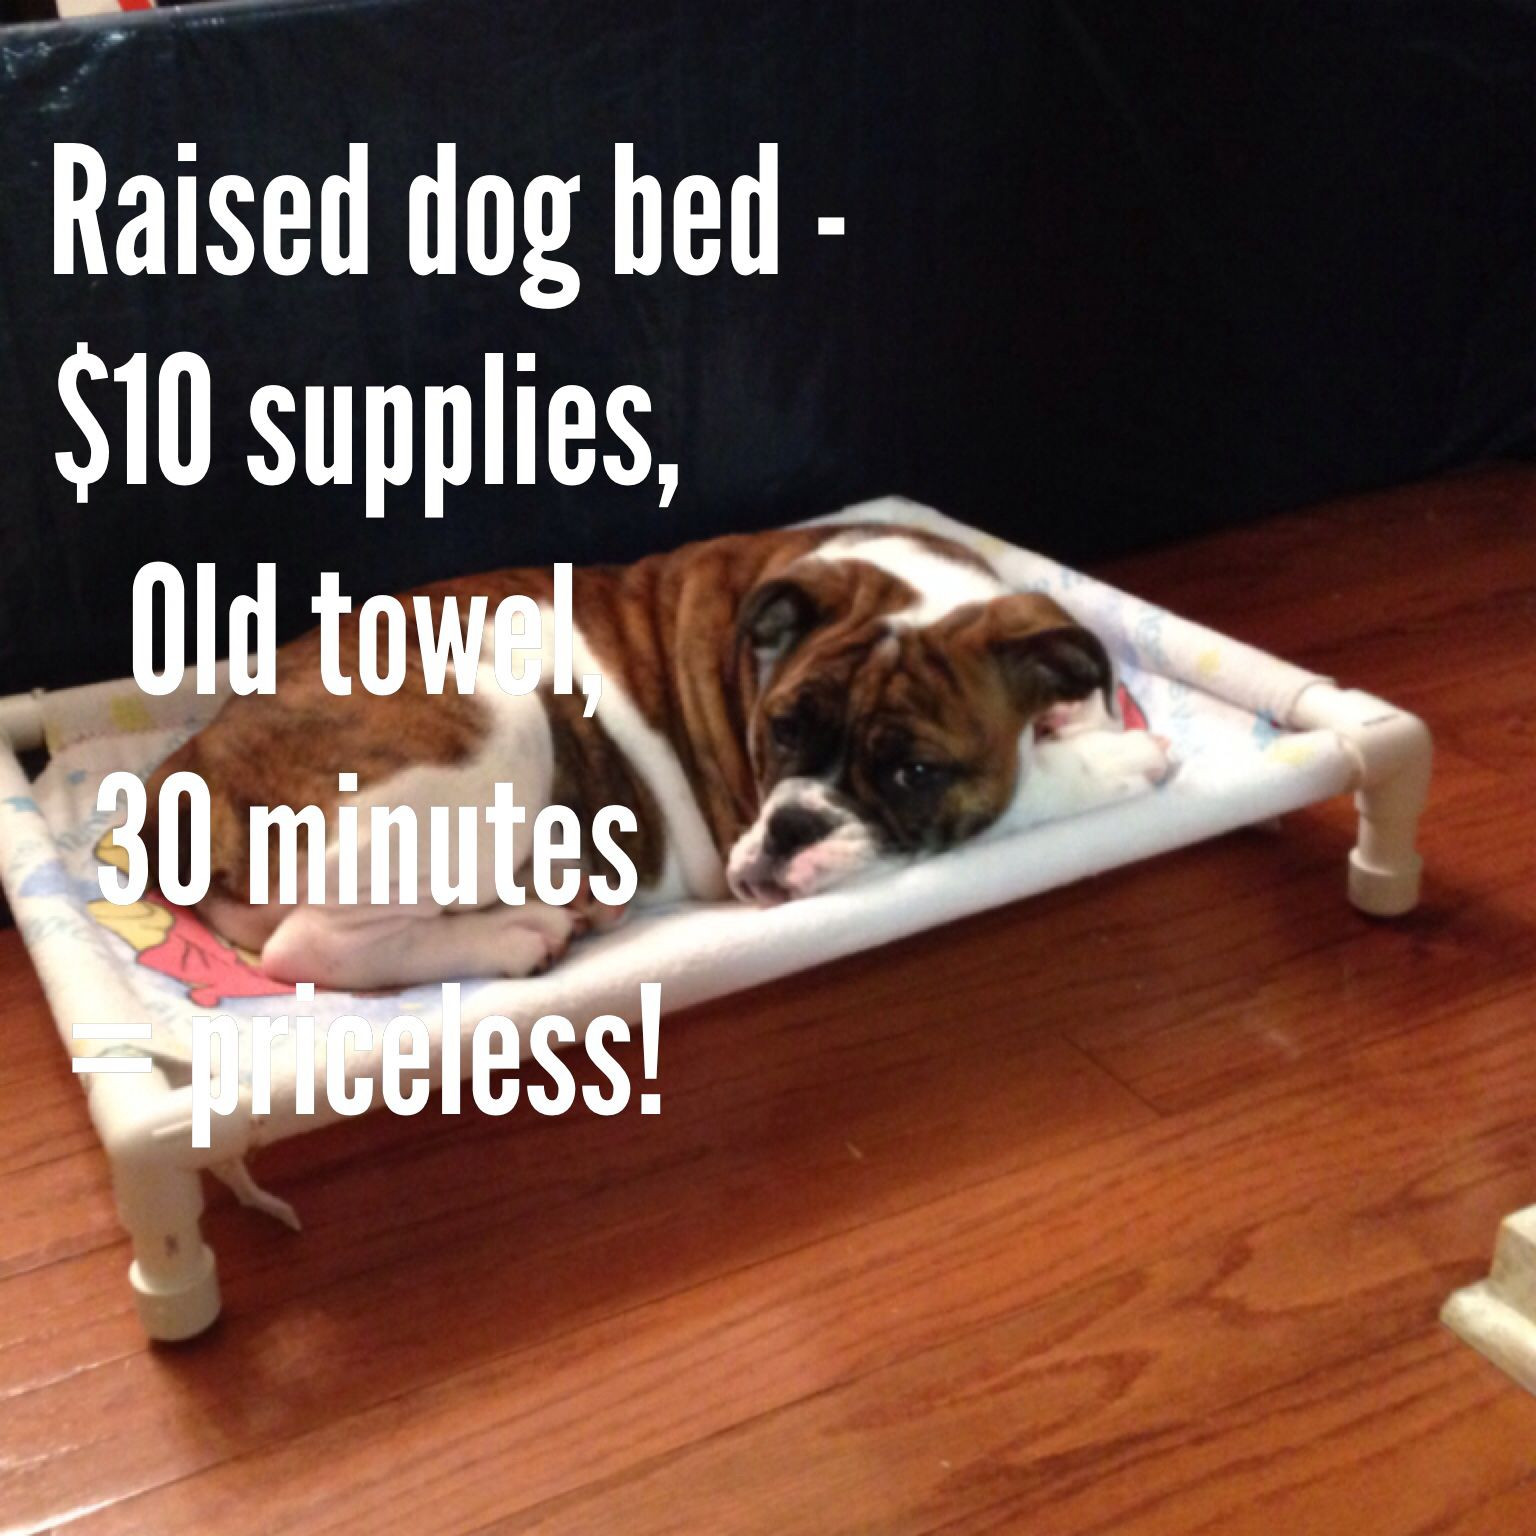 DIY Pvc Dog Bed
 Do it yourself raised dog bed with pvc piping and an old